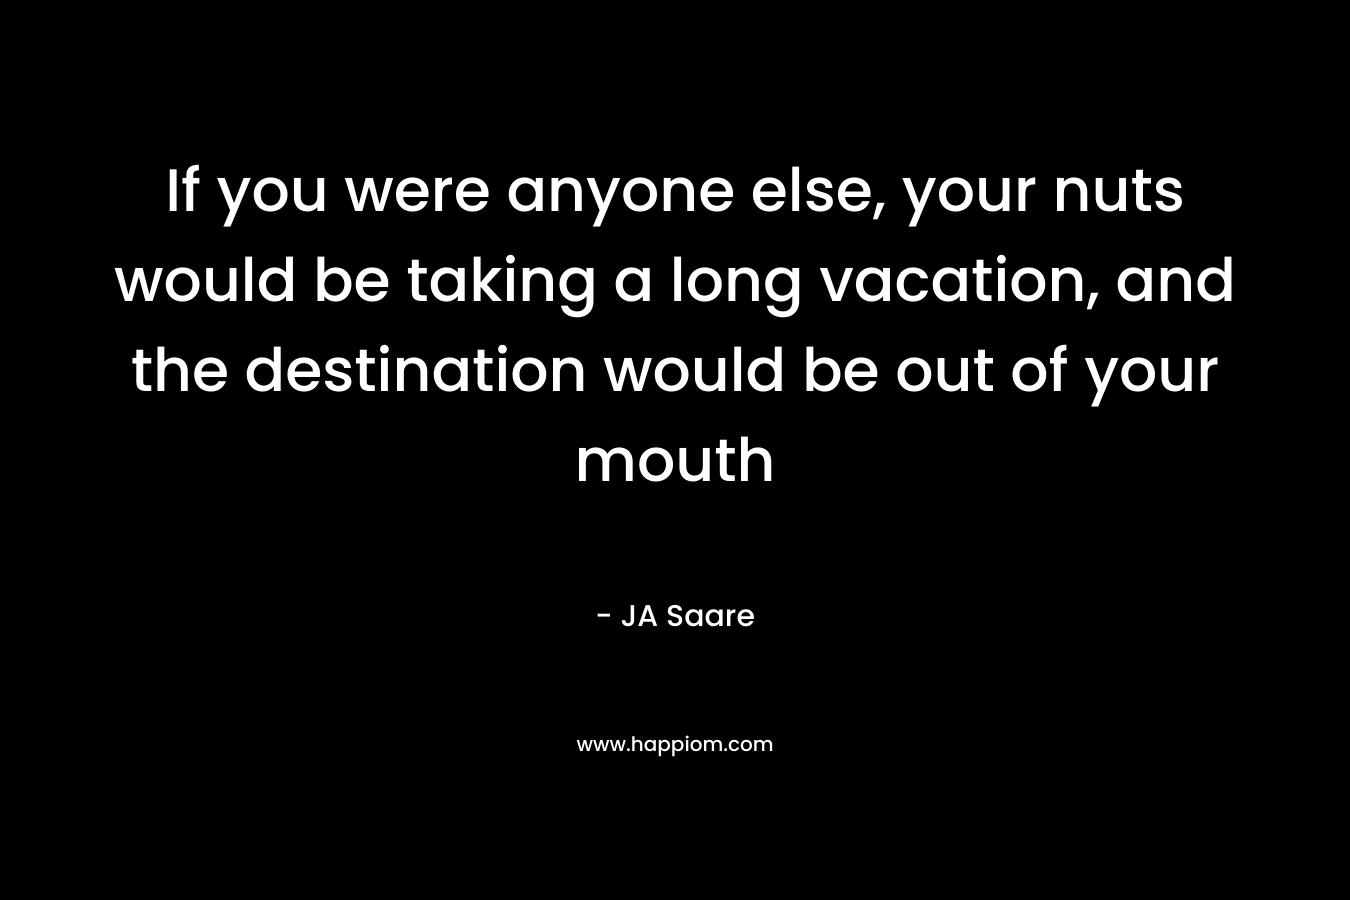 If you were anyone else, your nuts would be taking a long vacation, and the destination would be out of your mouth